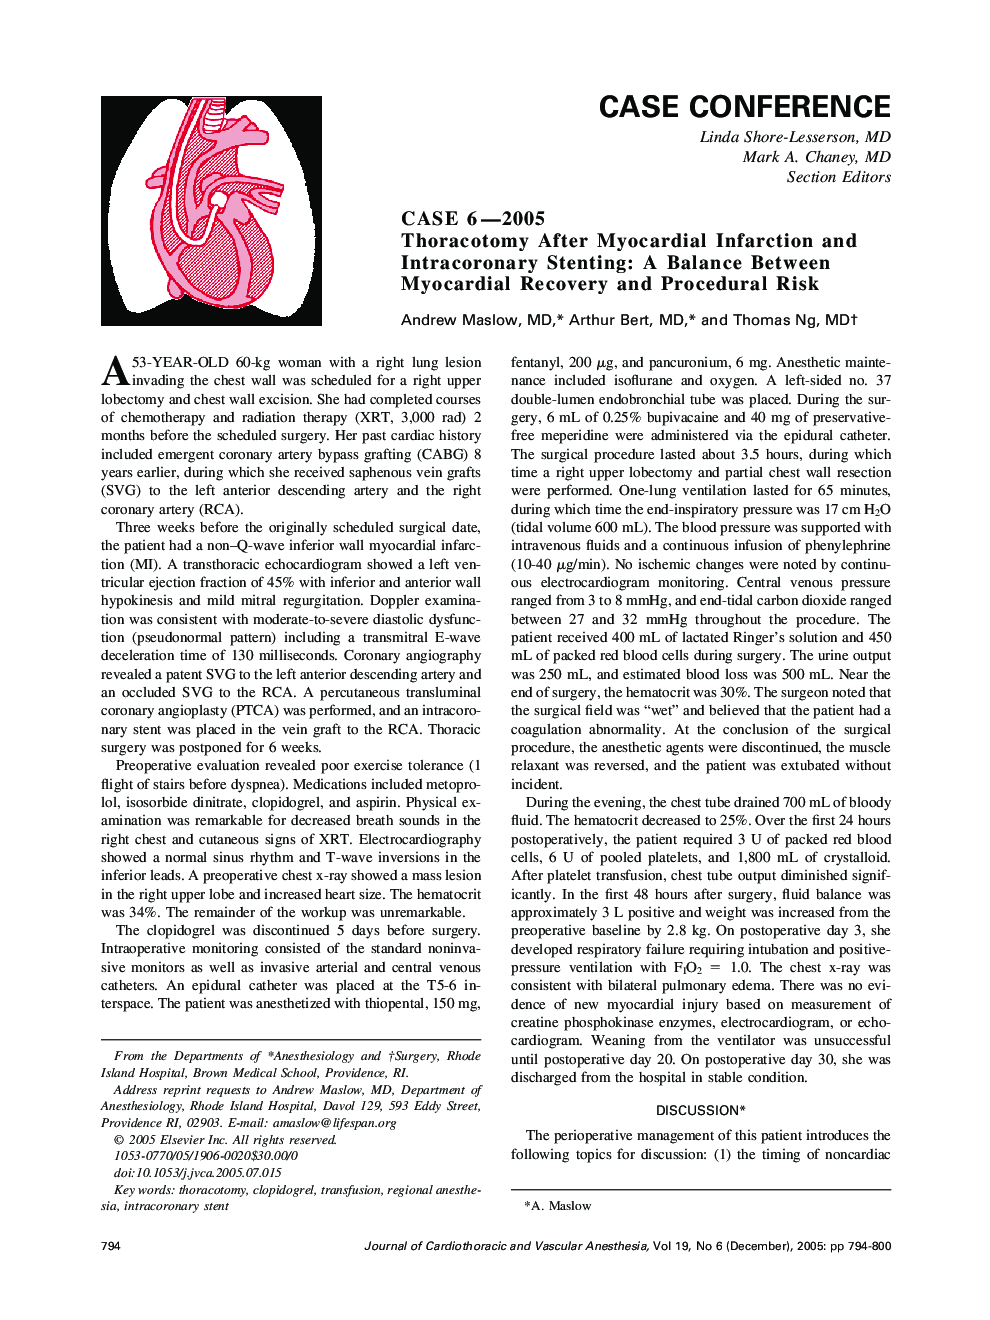 Case 6-2005 Thoracotomy After Myocardial Infarction and Intracoronary Stenting: A Balance Between Myocardial Recovery and Procedural Risk